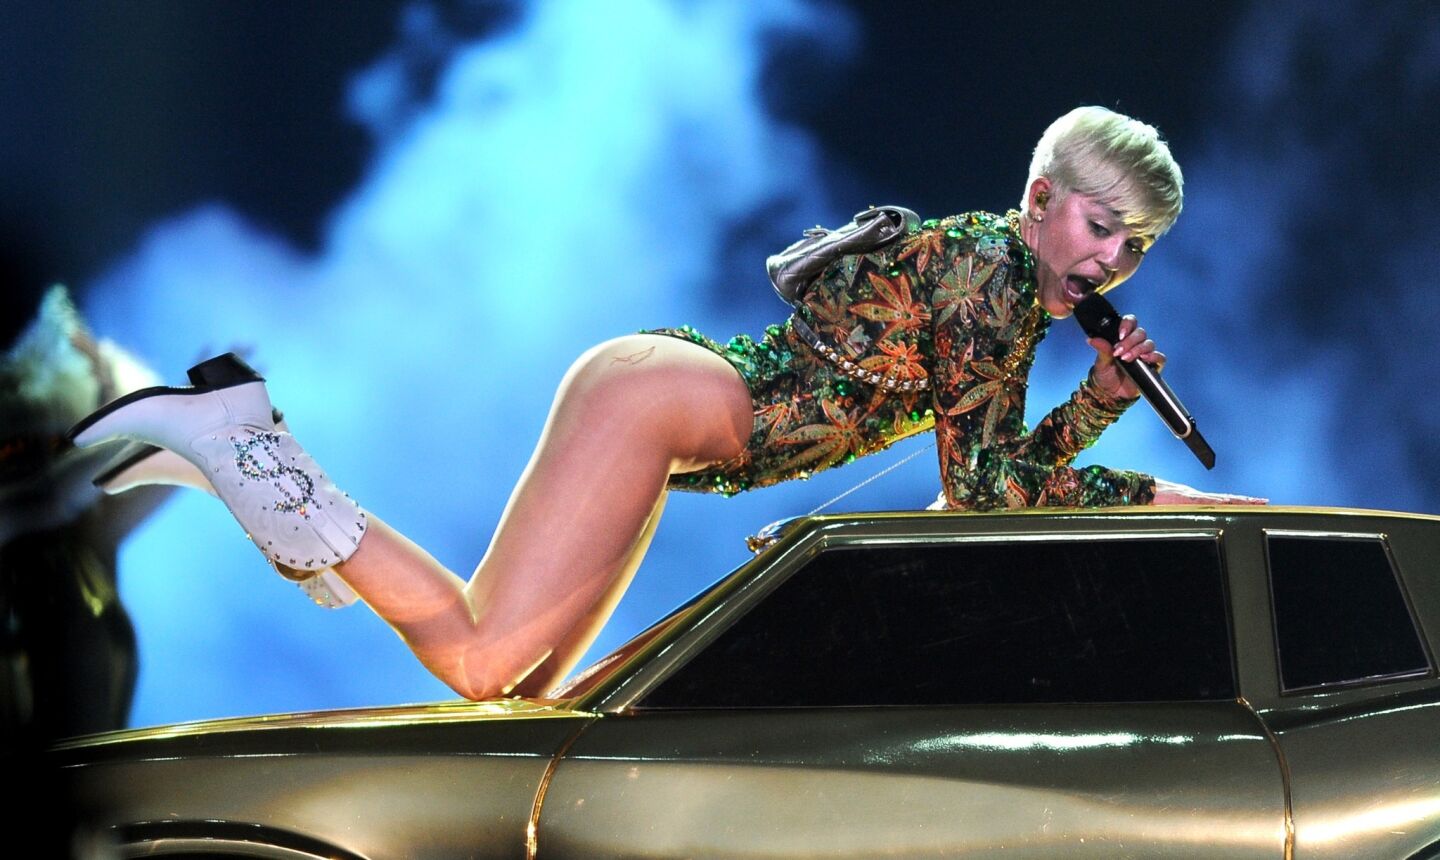 Miley Cyrus leans in atop a car, showing off her cowboy boots with a money symbol.